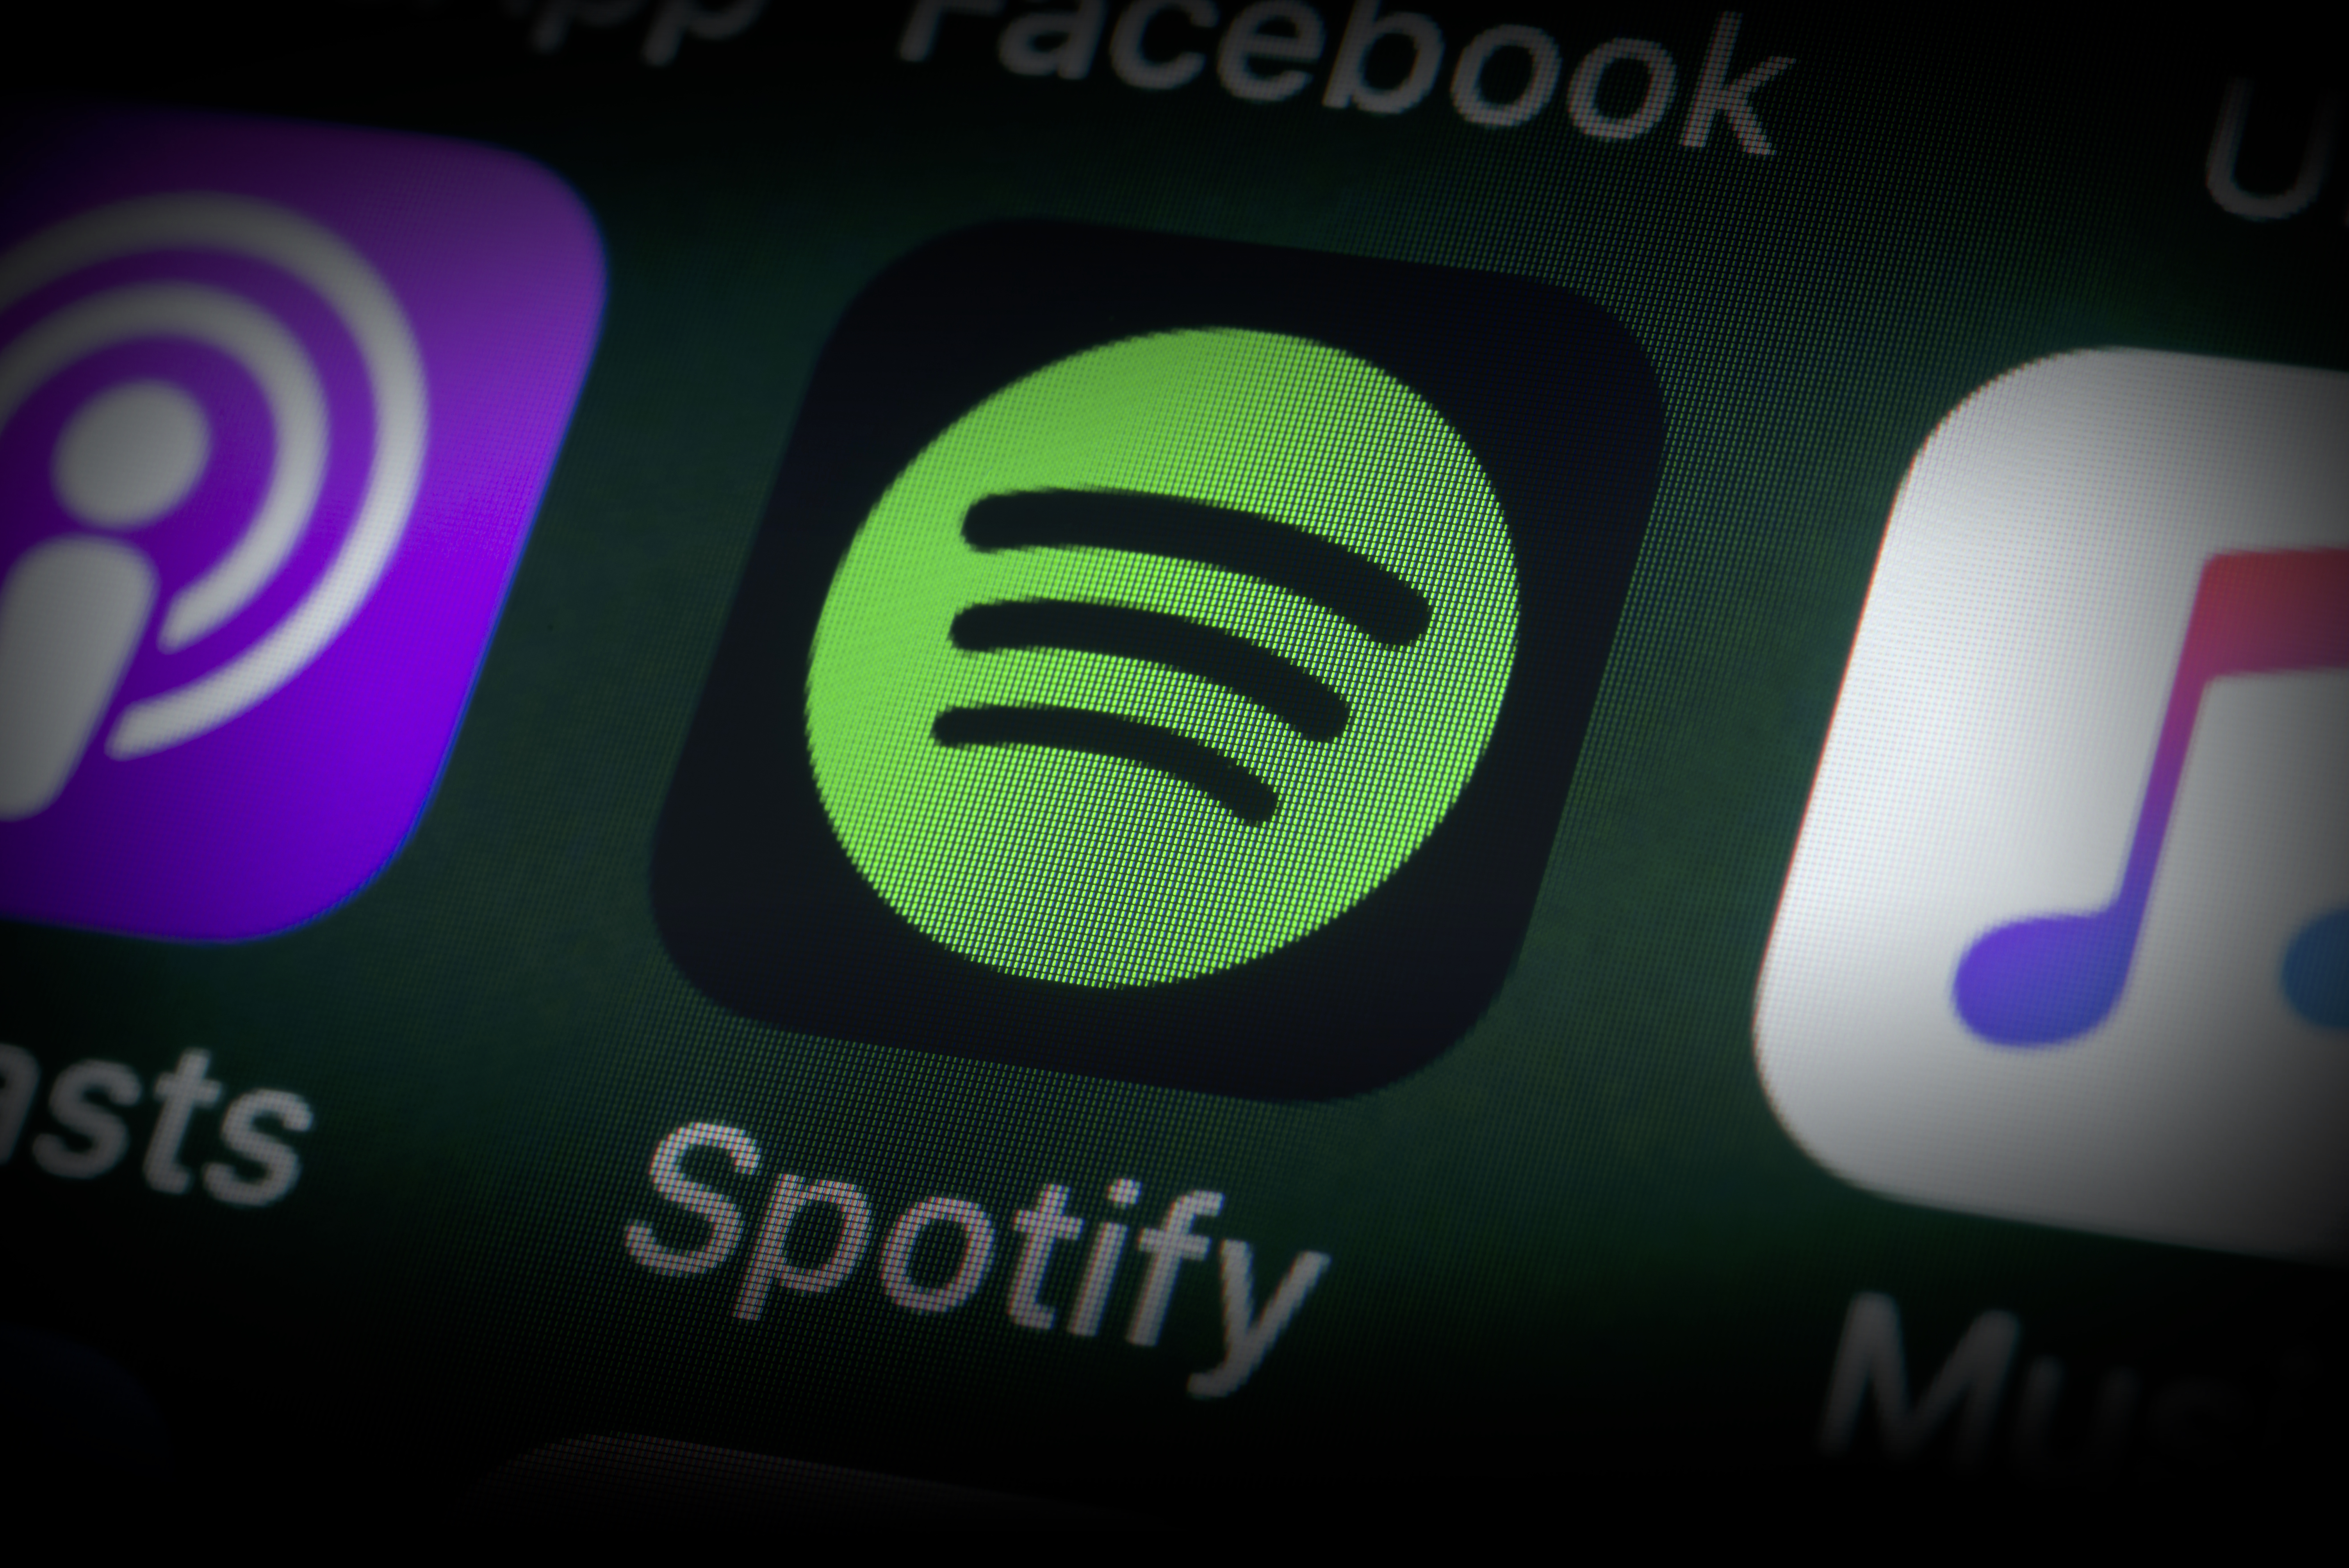 London, UK - July 31, 2018: The buttons of the music streaming app Spotify, surrounded by Podcasts, Apple Music, Facebook and other apps on the screen of an iPhone.